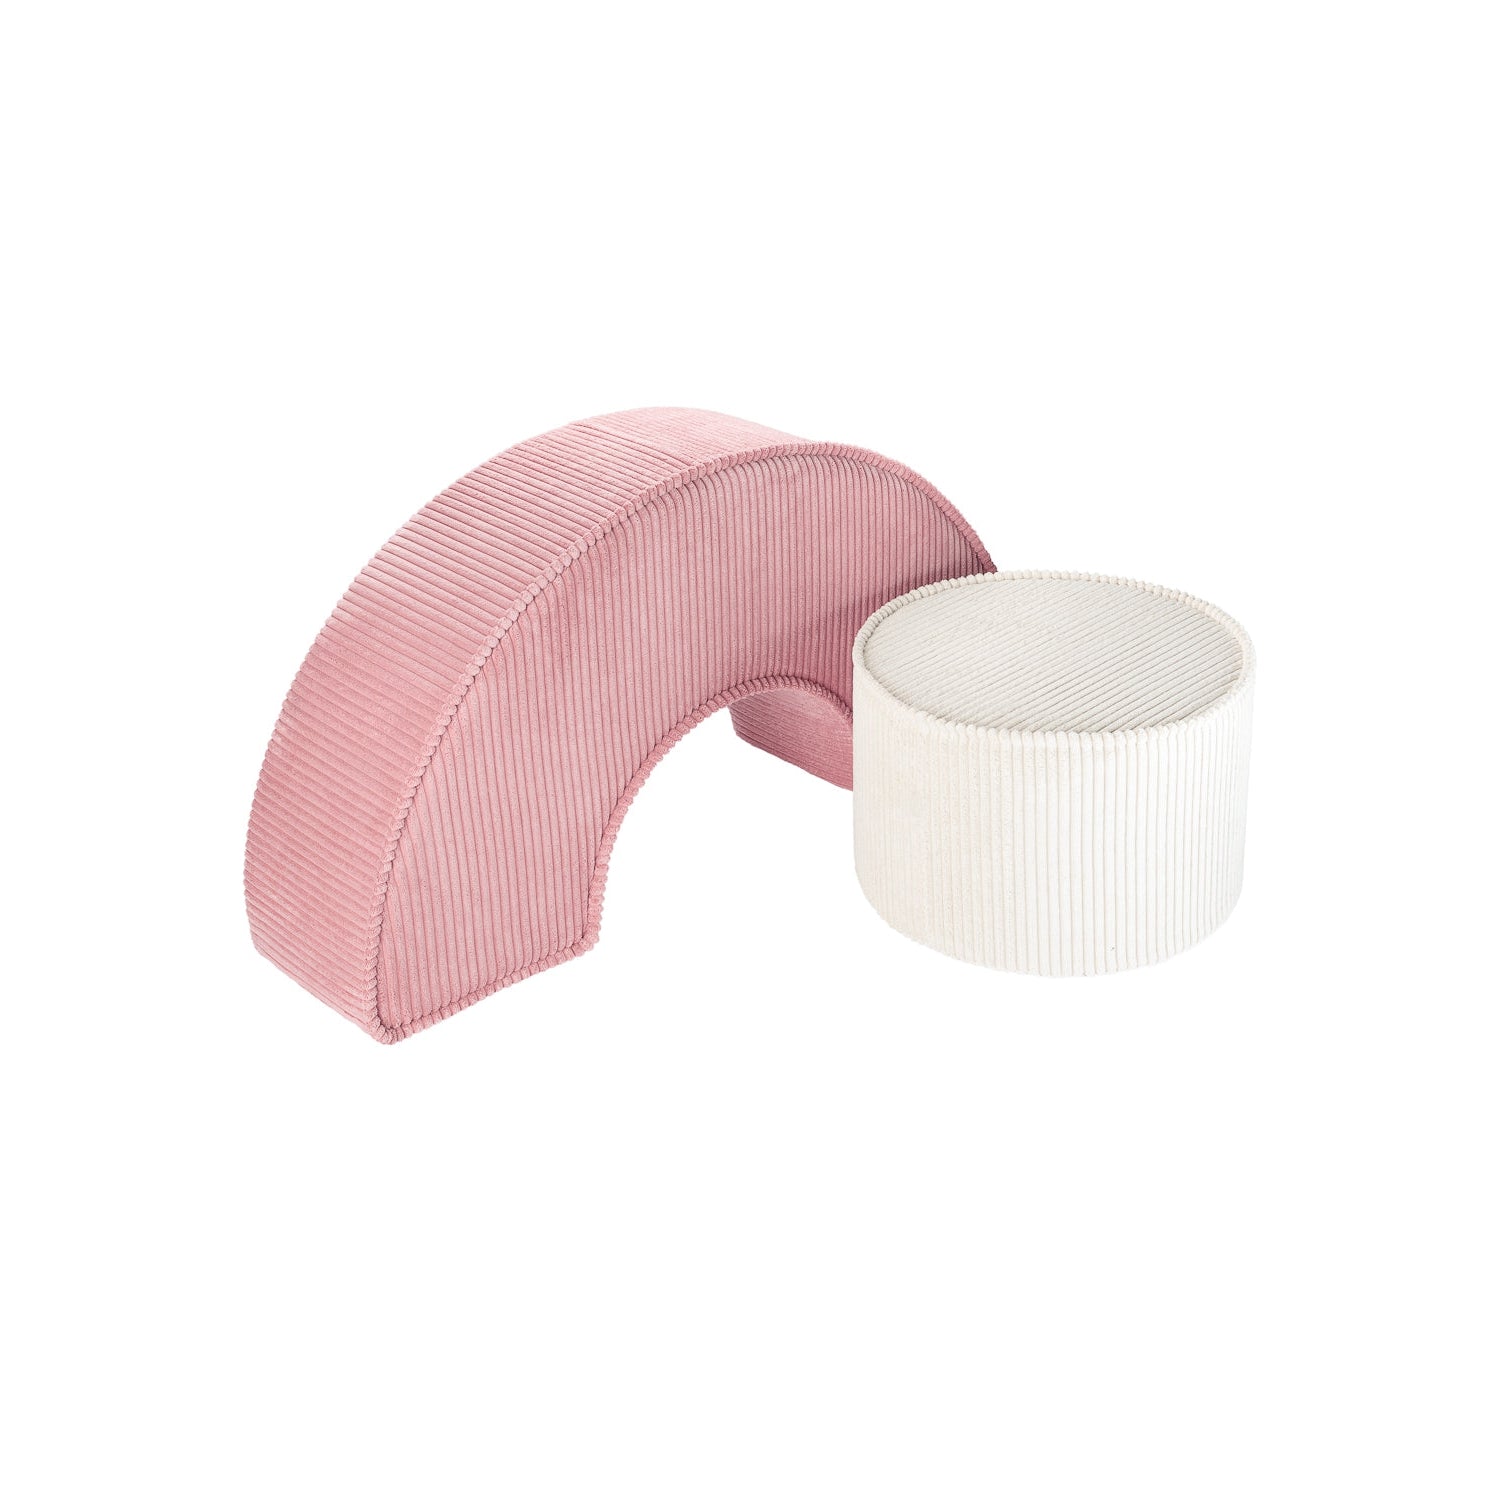 Wigiwama Pink Mousse Pouffe Set at Rugs by Roo